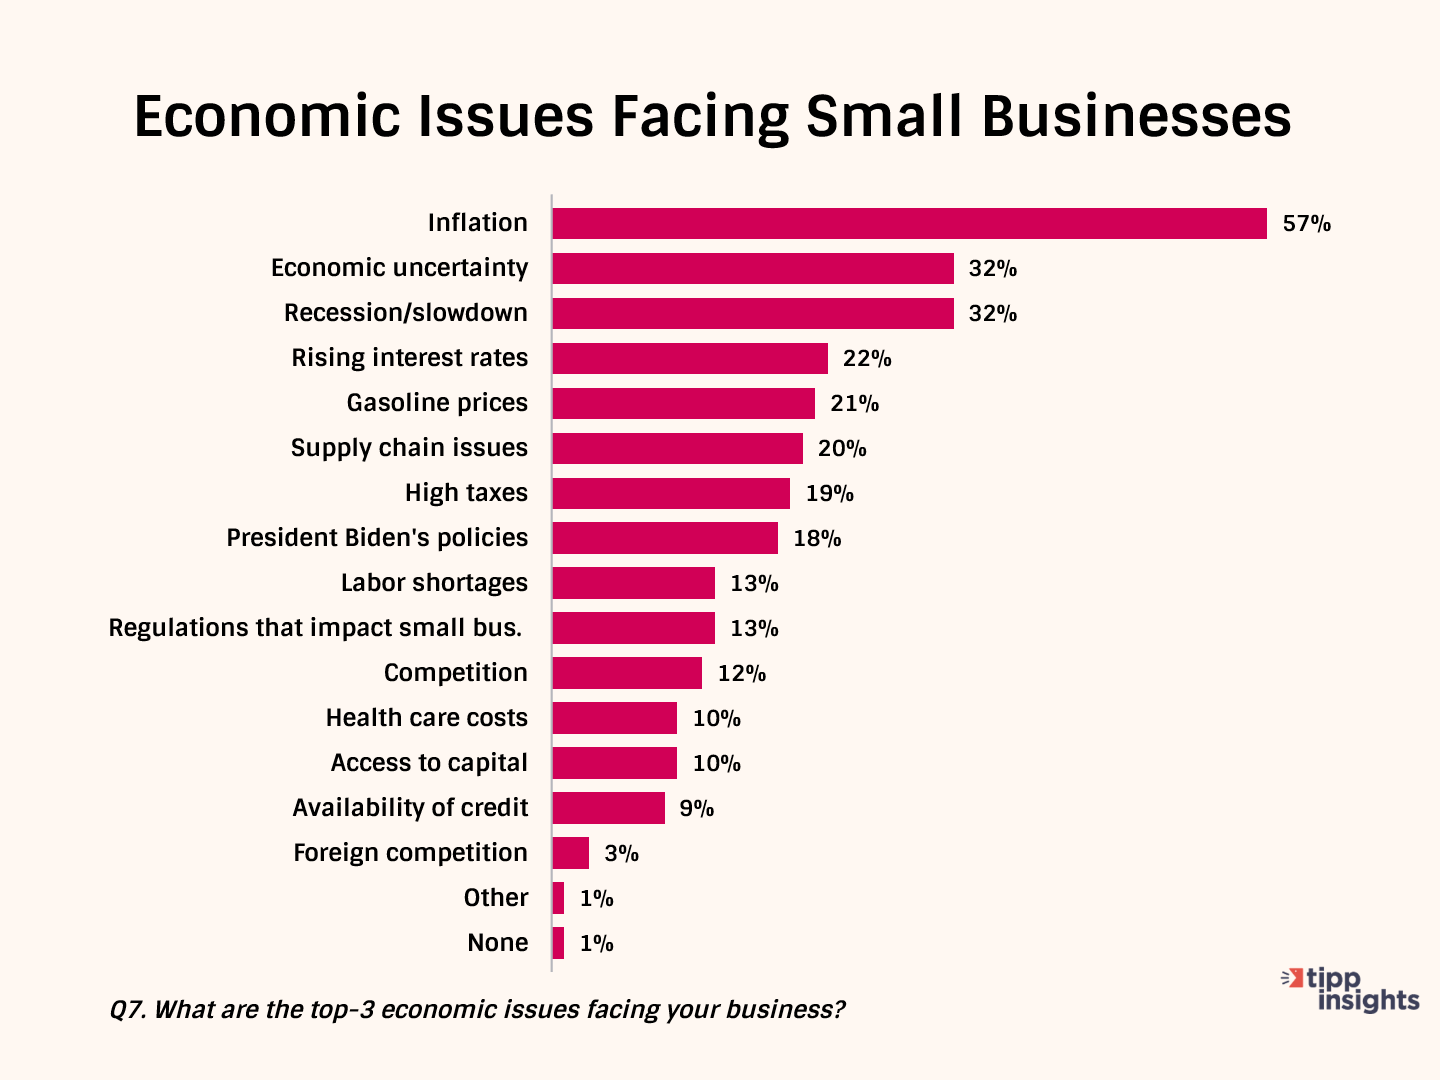 American Small Businesses Face Significant Economic Challenges